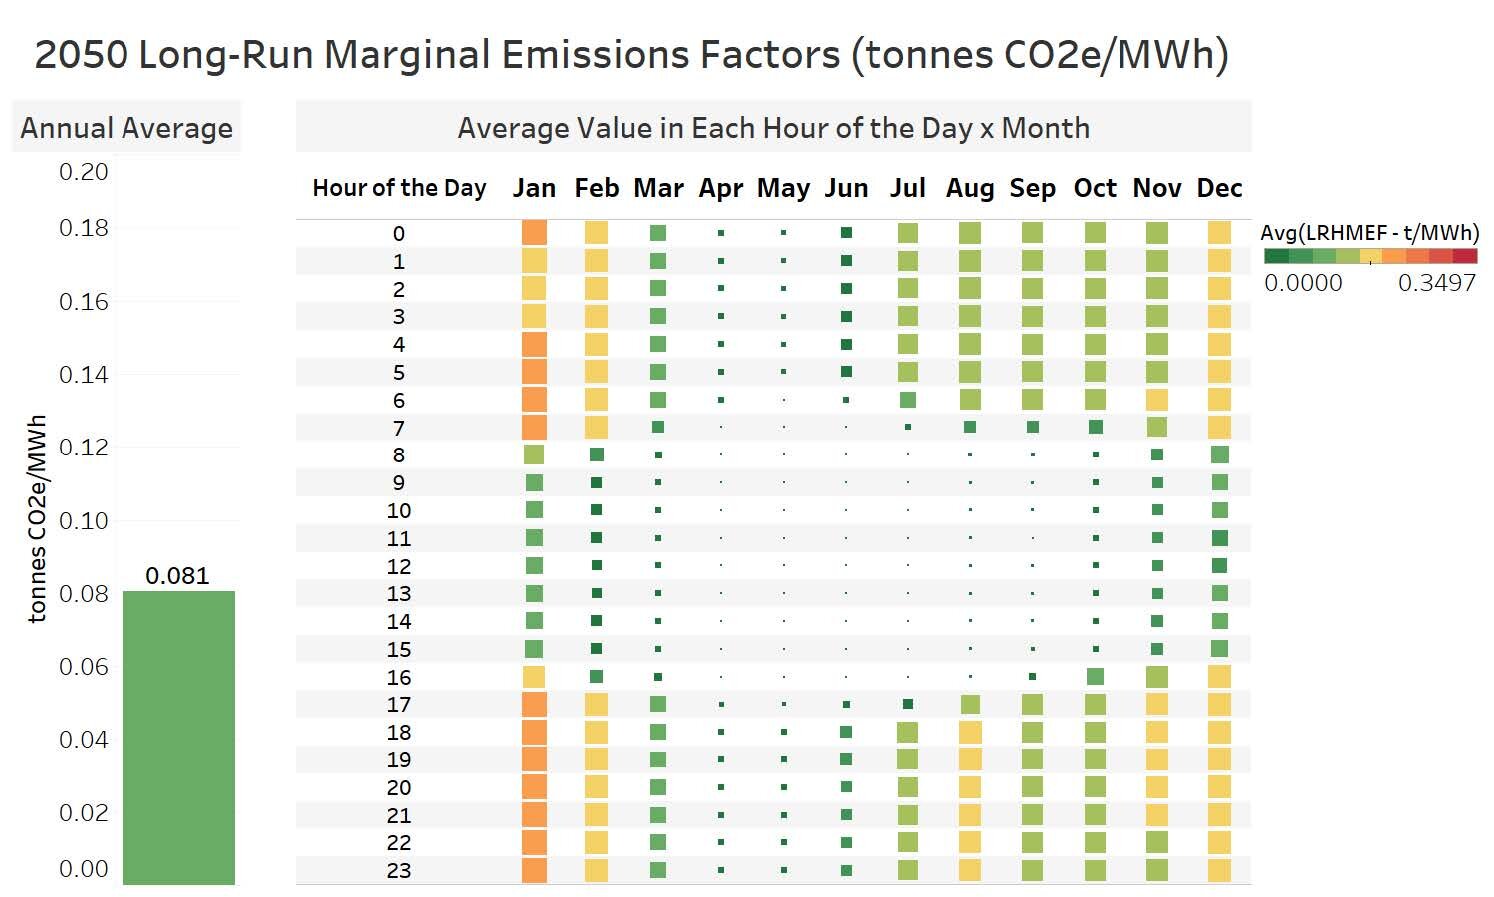  Heat map of emissions factors used for 2050, summarized by the average value in each hour of the day of each month; unweighted annual average shown for reference. 